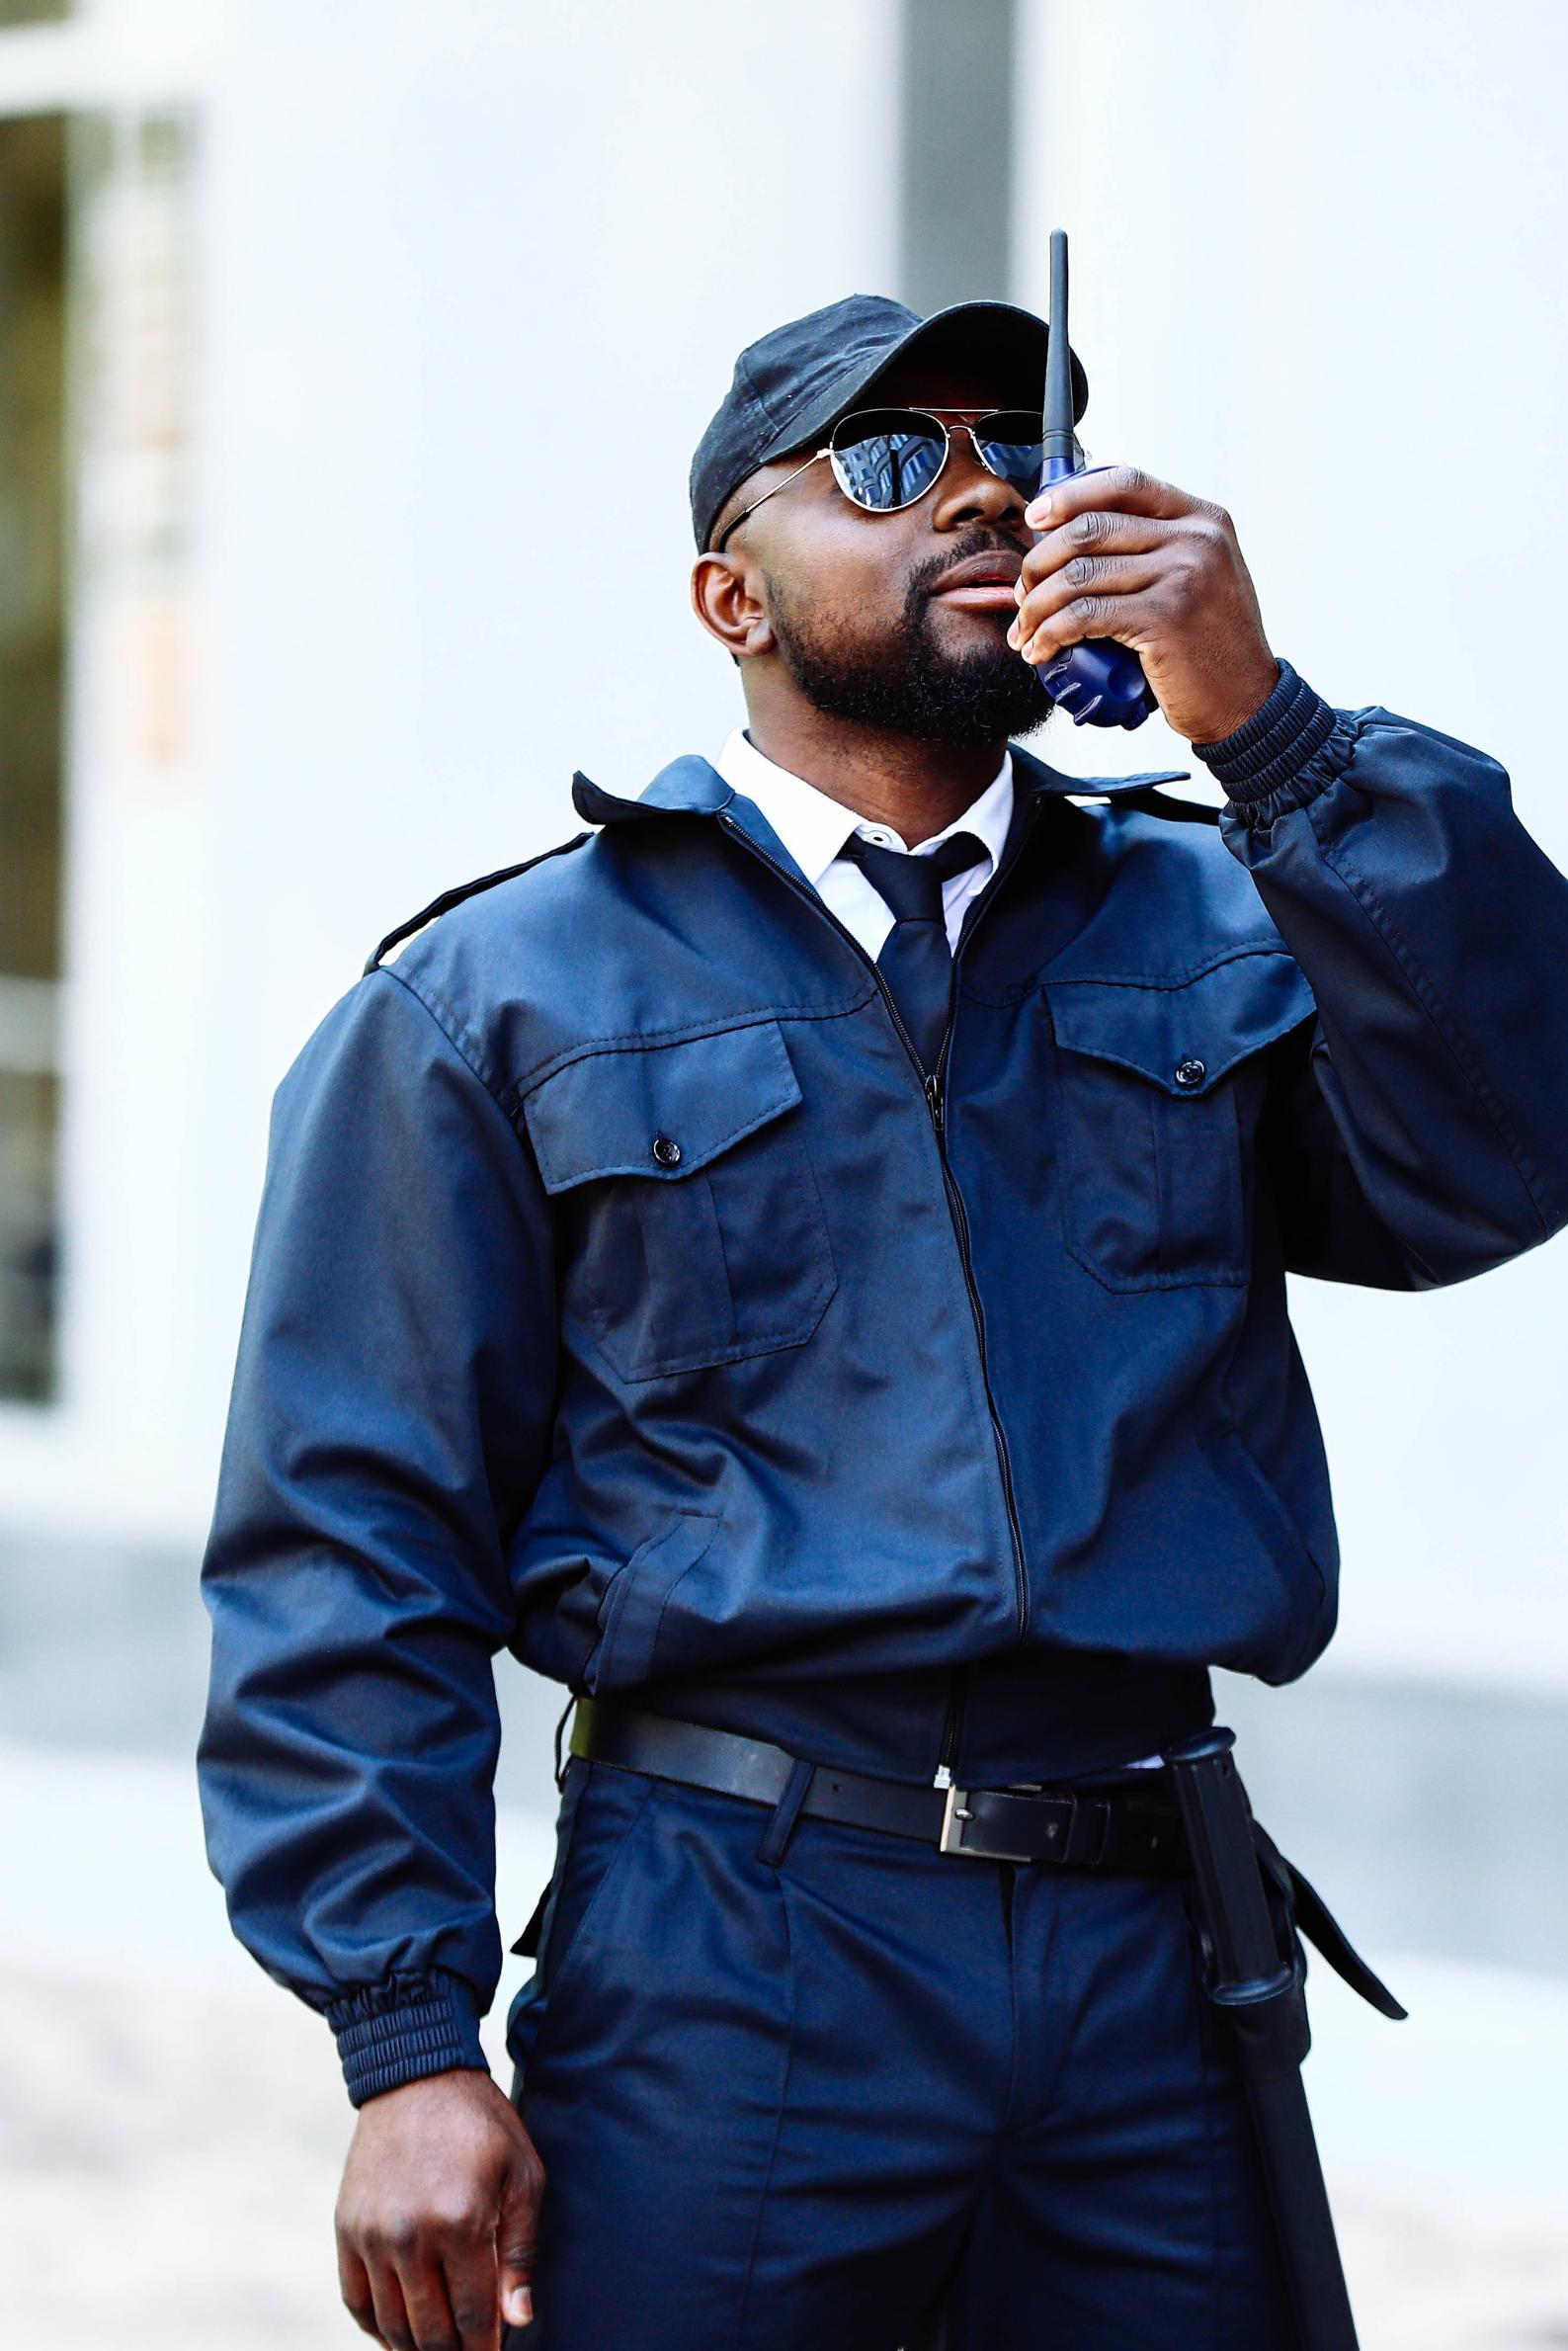 Man in security uniform standing in front of a building.